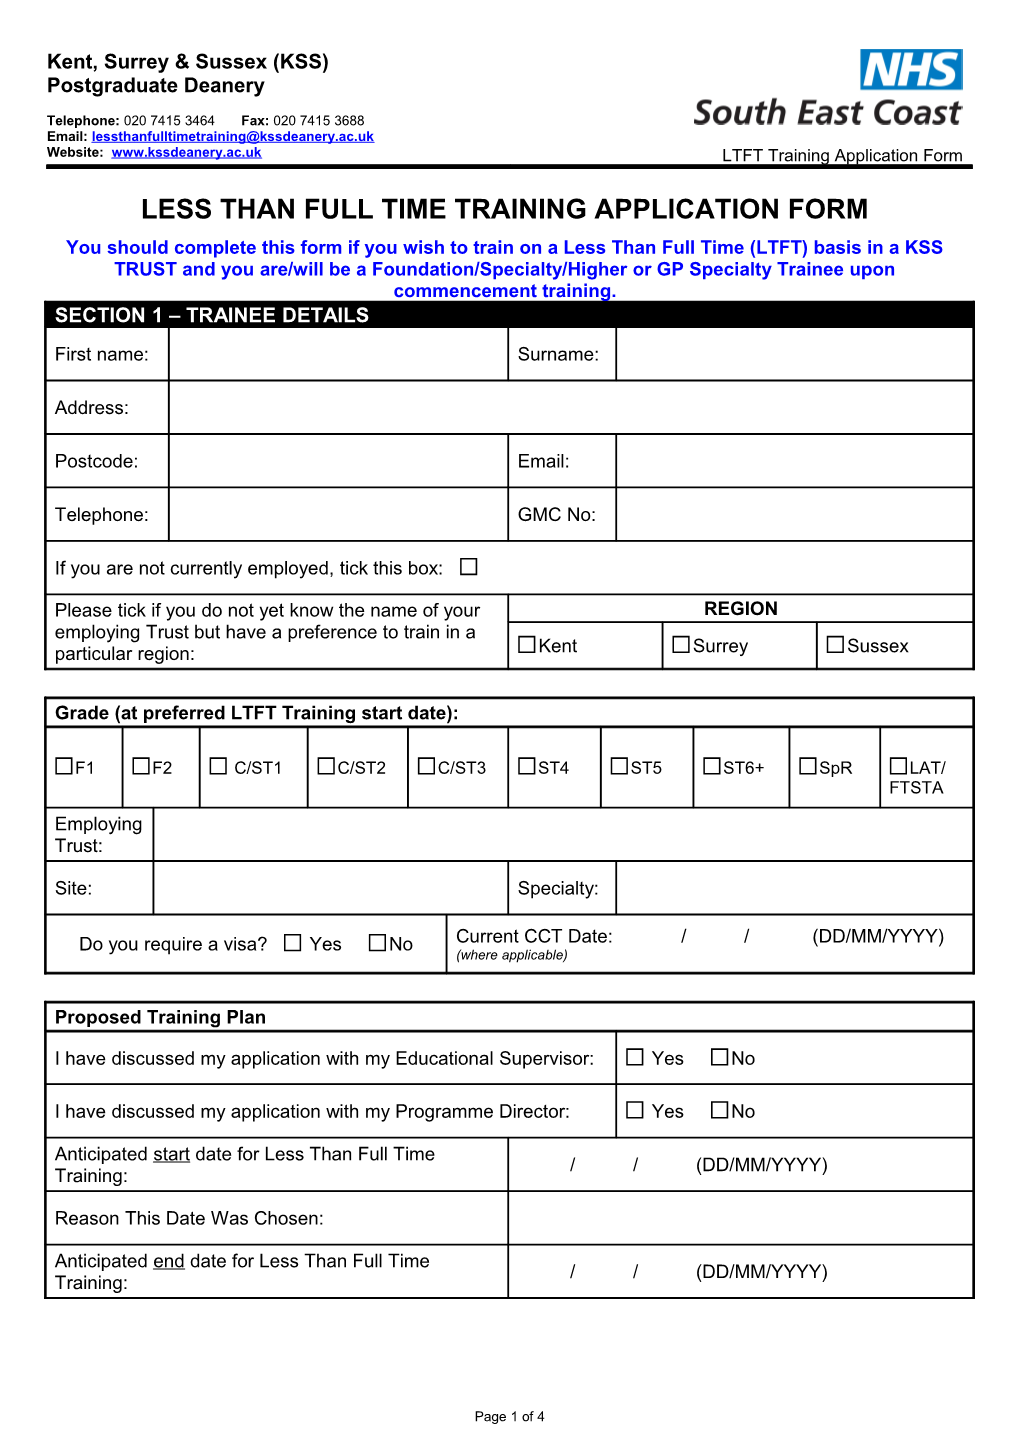 LESS THAN FULL TIME TRAINING APPLICATION FORM (Foundation)